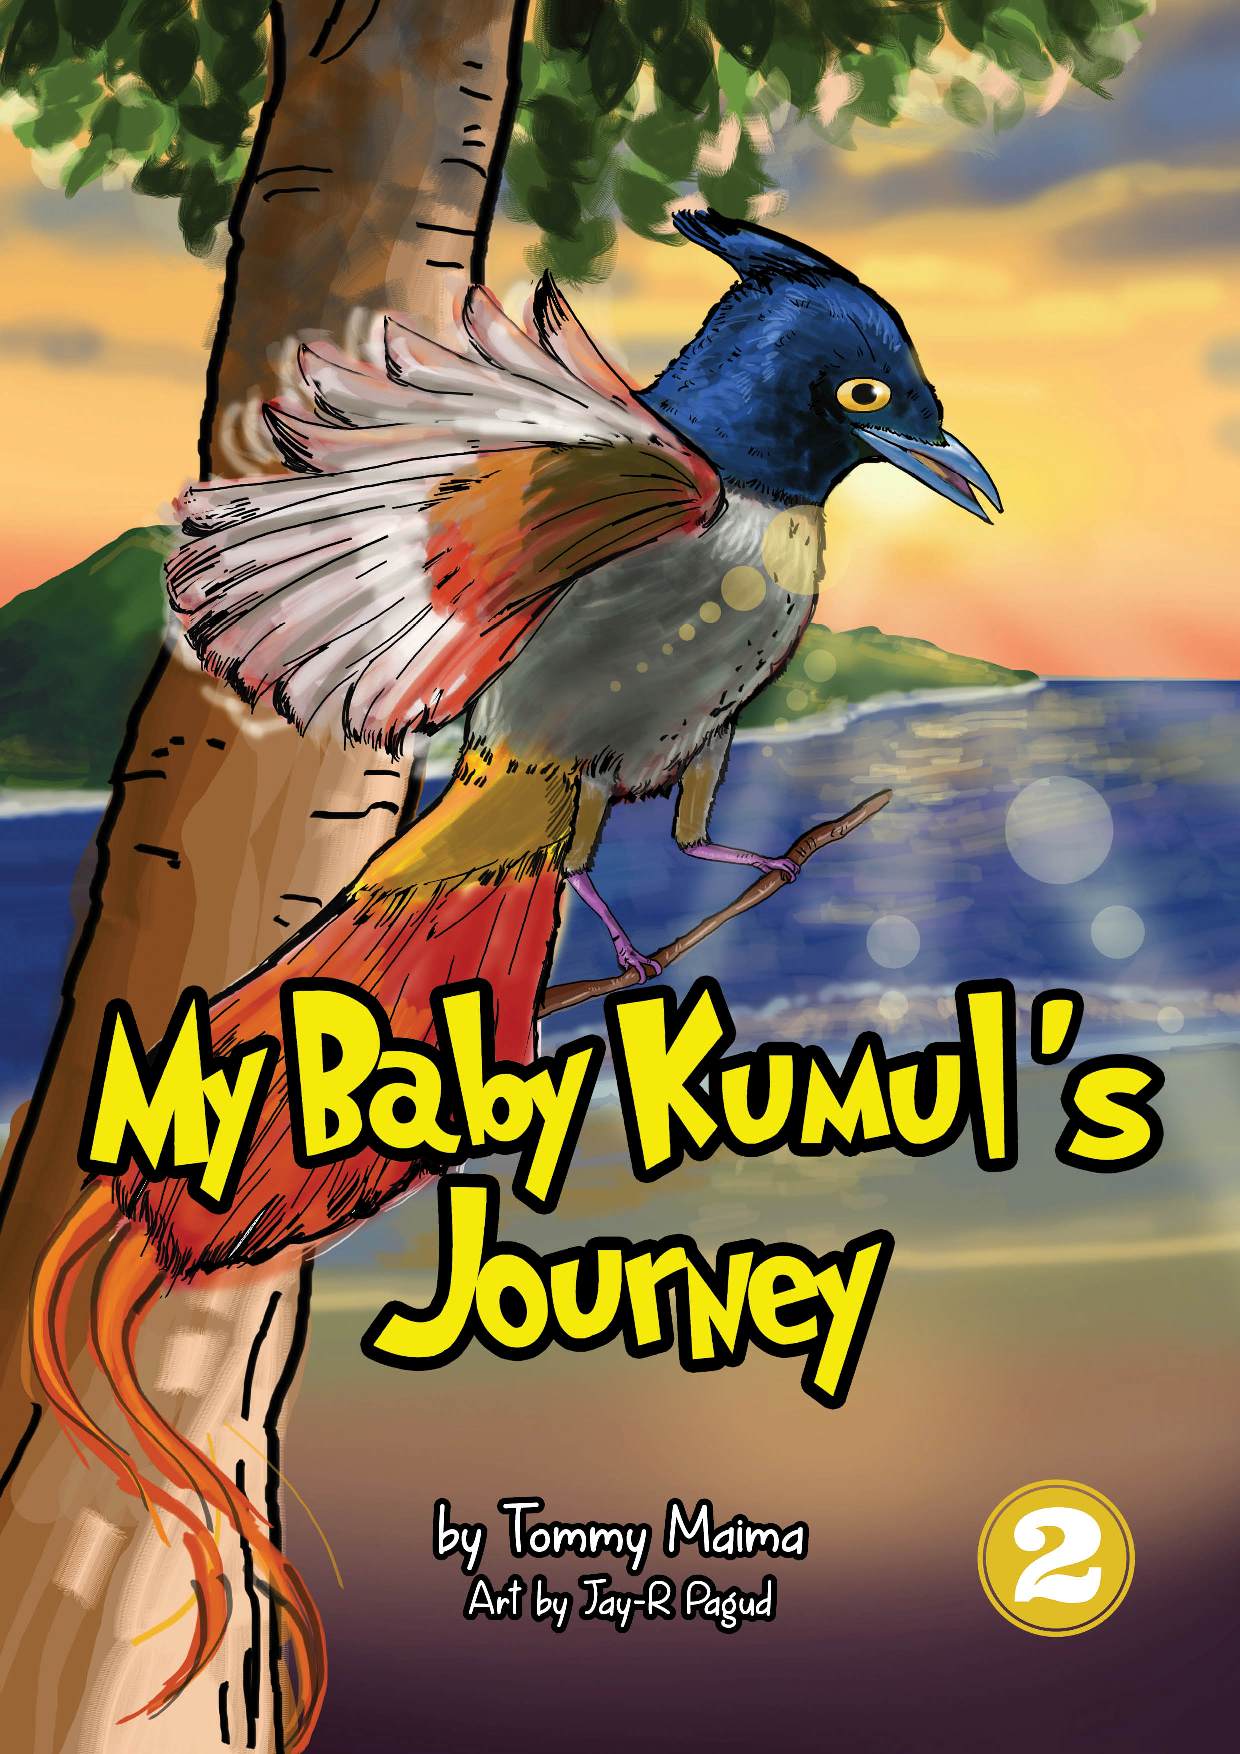 A book title page: My baby kumul’s journey by Tommy Maima. Art by Jay-R Pagud. 2. A drawing of a bird on a tree. The bird has different colors. The head is blue, the wings have orange feathers, and its tail is red with two long orange feathers. The bird is facing toward the sea.